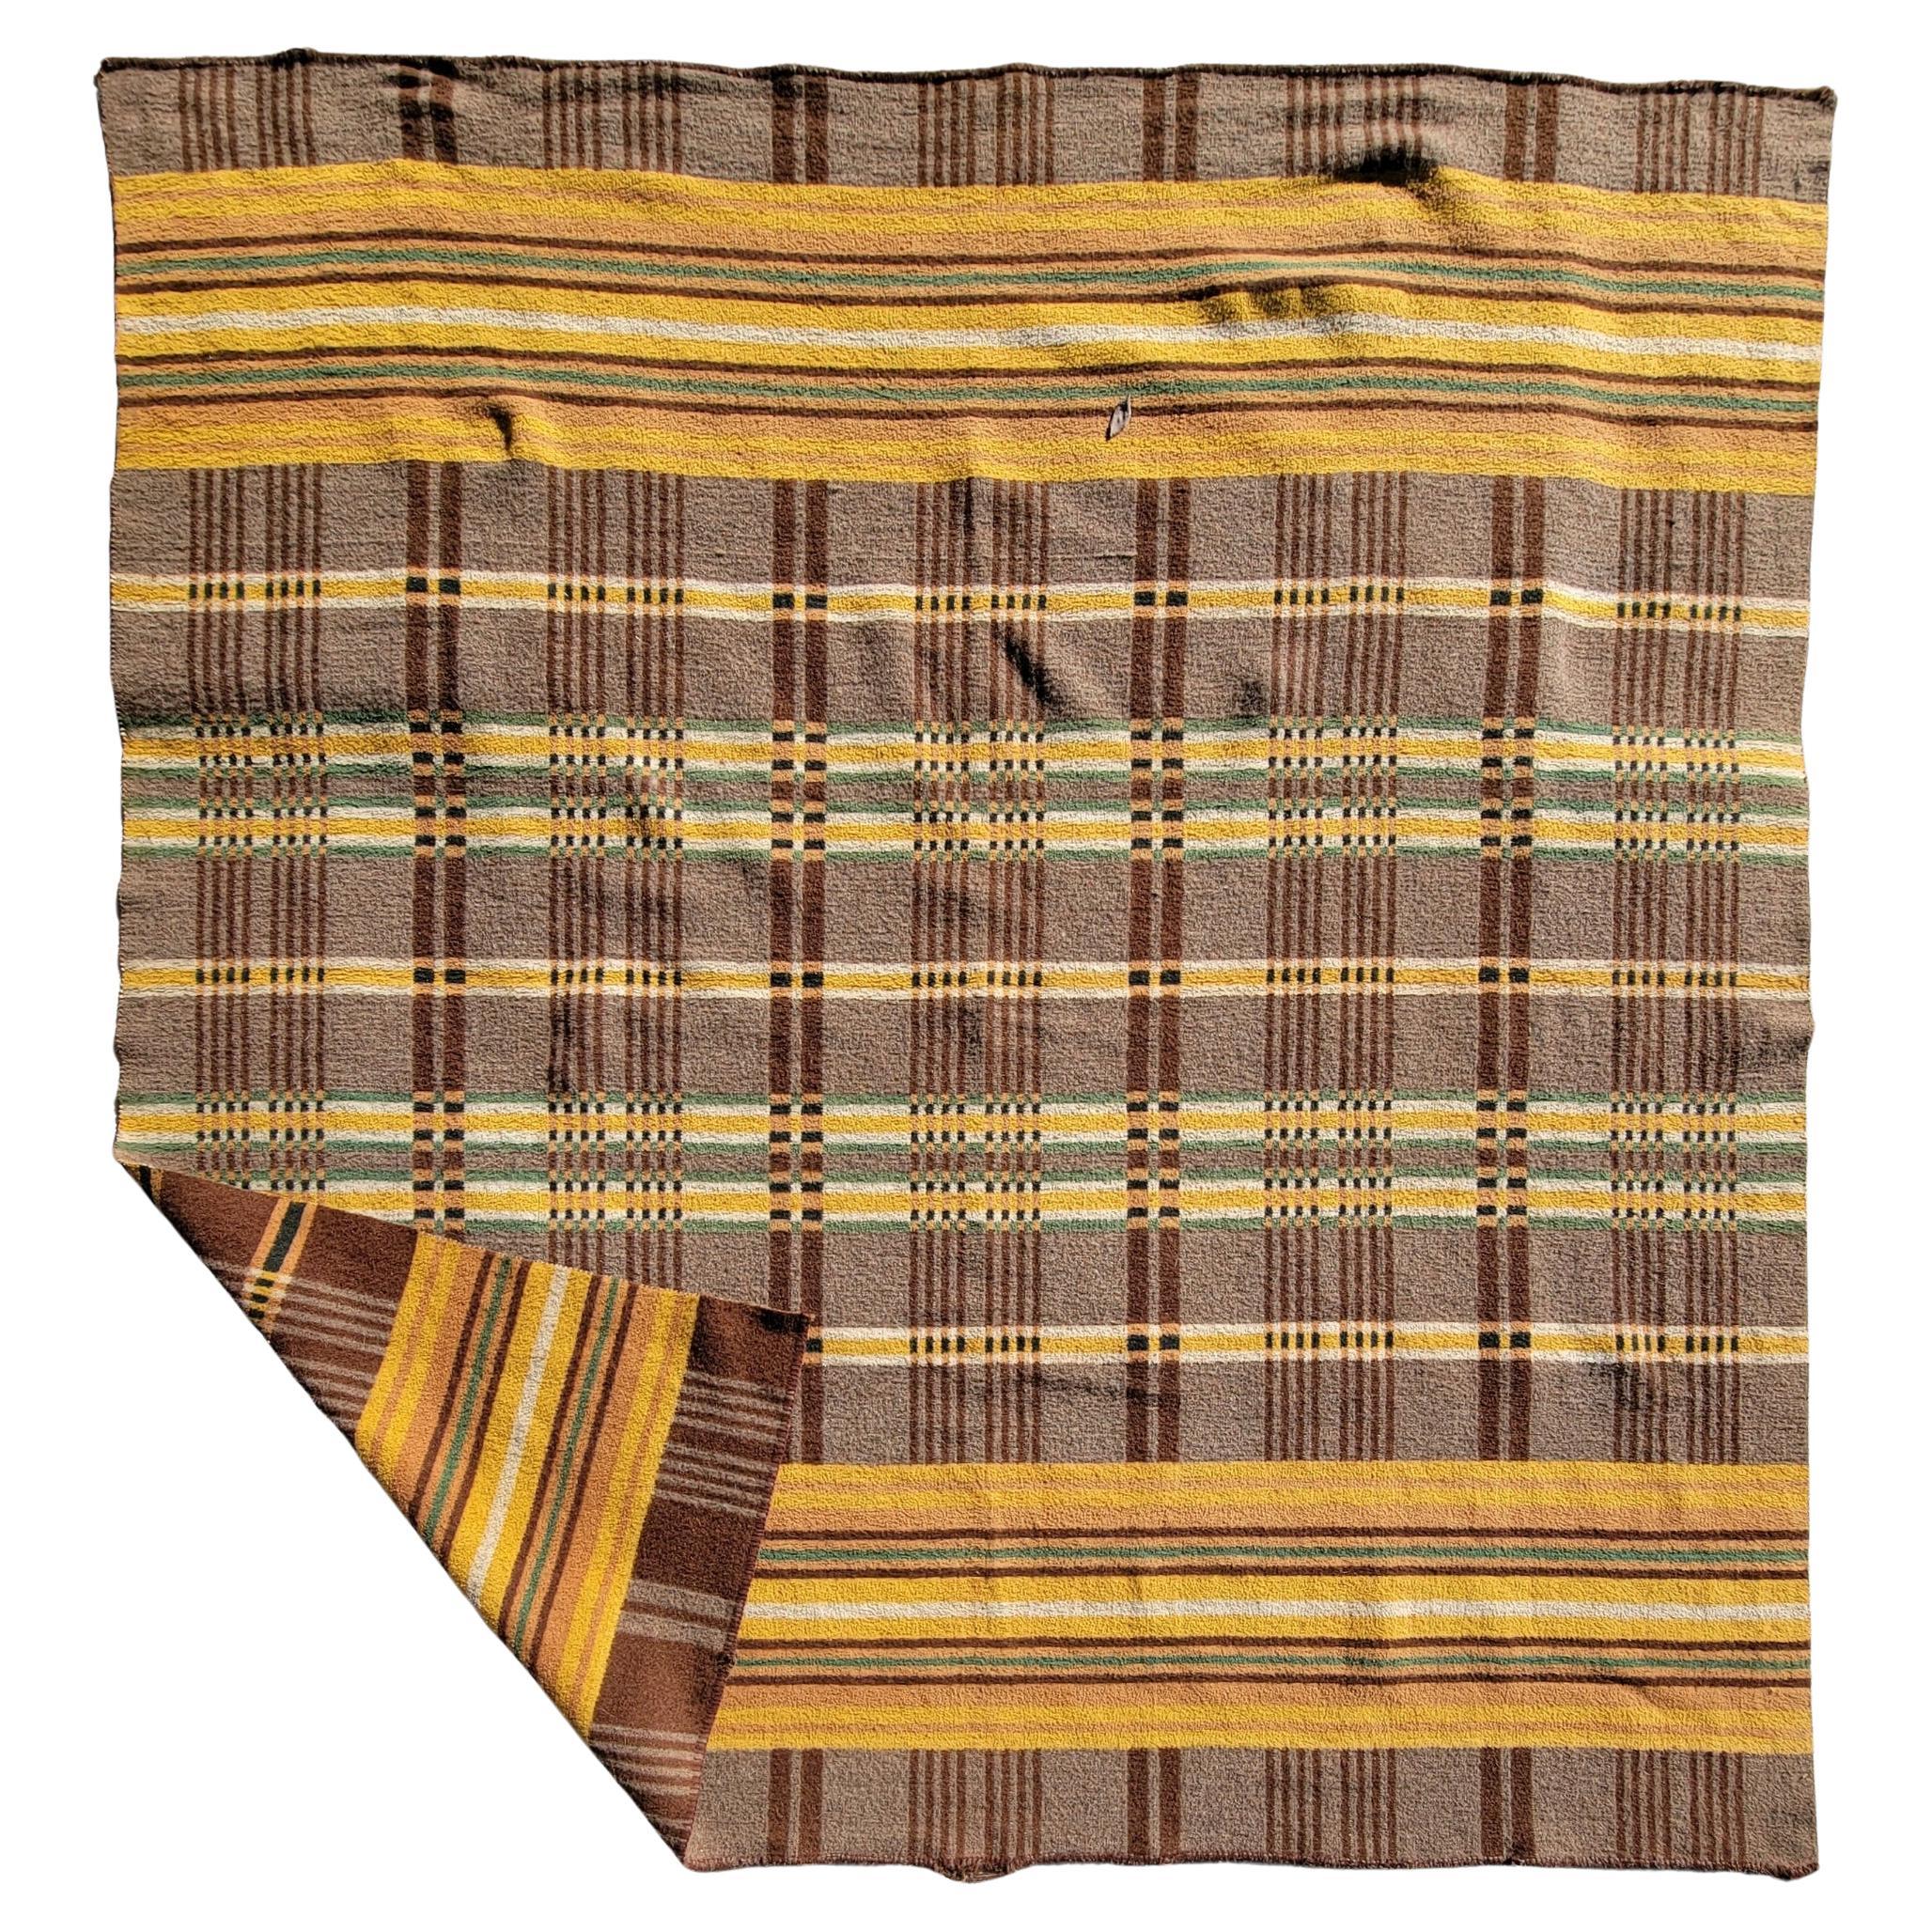 Wonderful double sided plaid blanket with great colors. Great thick yellow striped with hints of green and white. Beautiful brown background hold the colors together and offers a great background for the colors to shine through. 